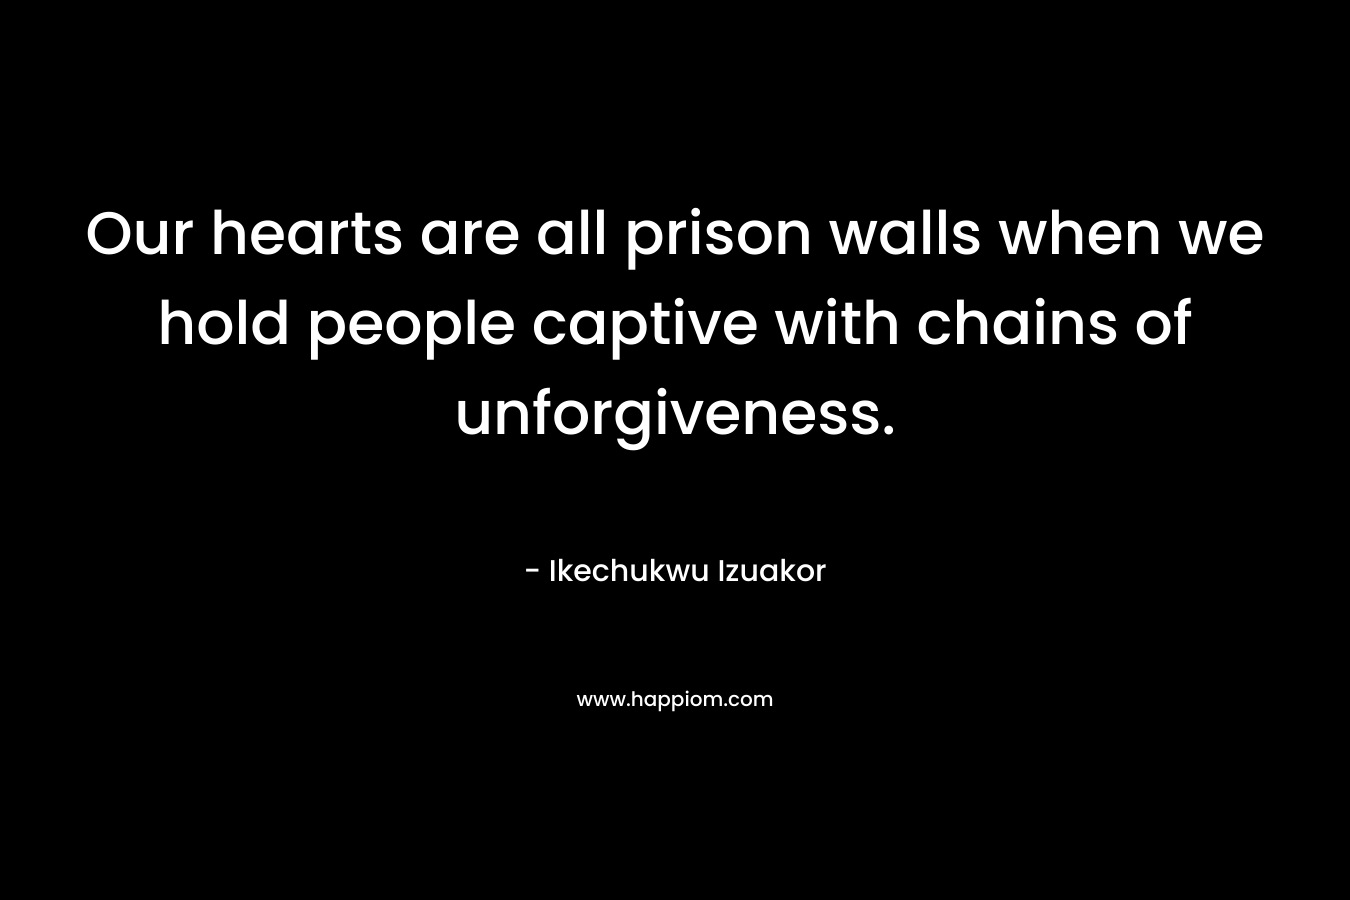 Our hearts are all prison walls when we hold people captive with chains of unforgiveness. – Ikechukwu Izuakor